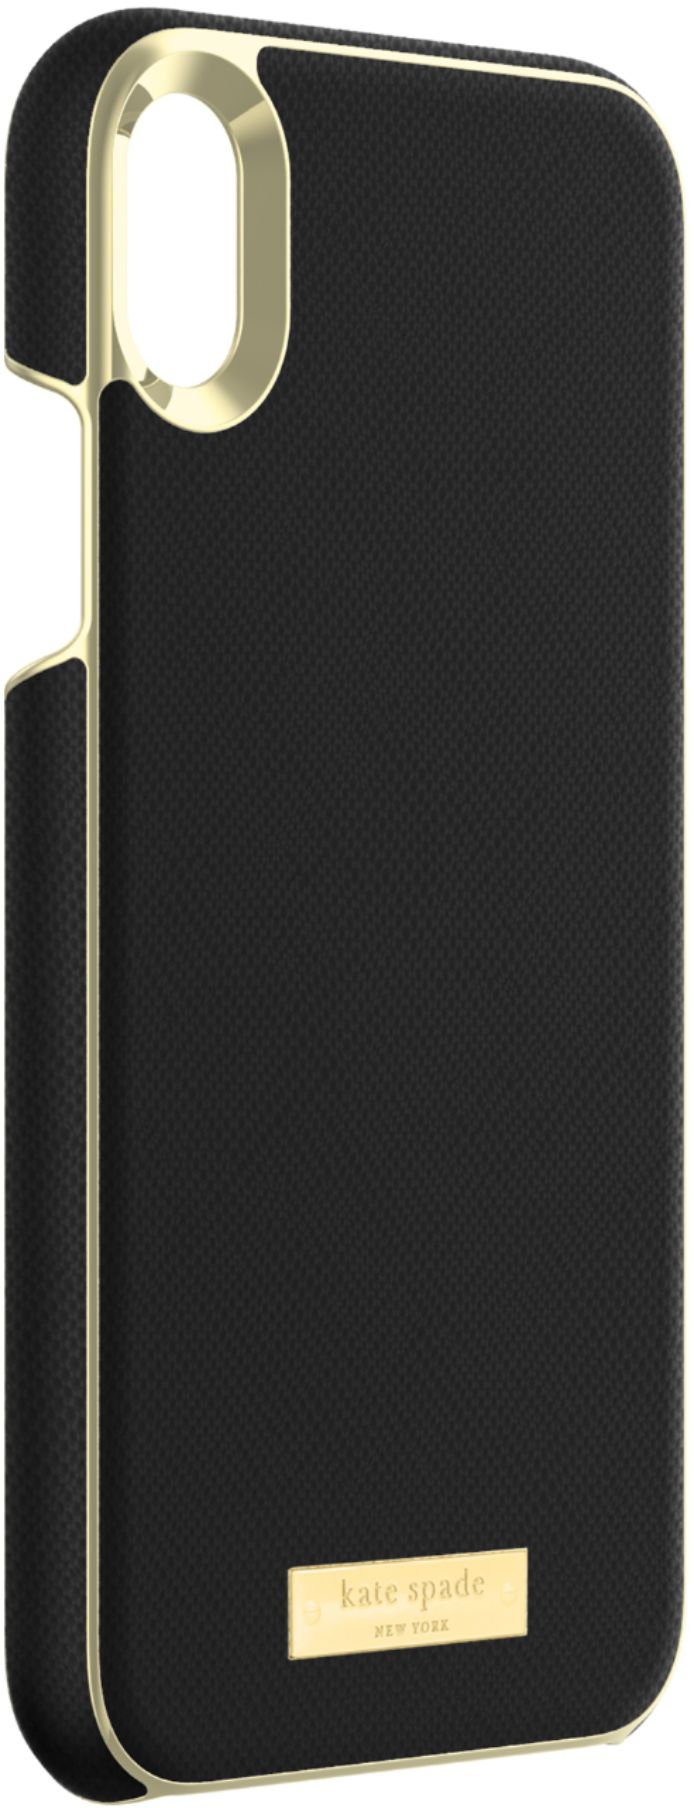 Angle View: kate spade new york - Protective Case for Apple® iPhone® XR - Saffiano Black